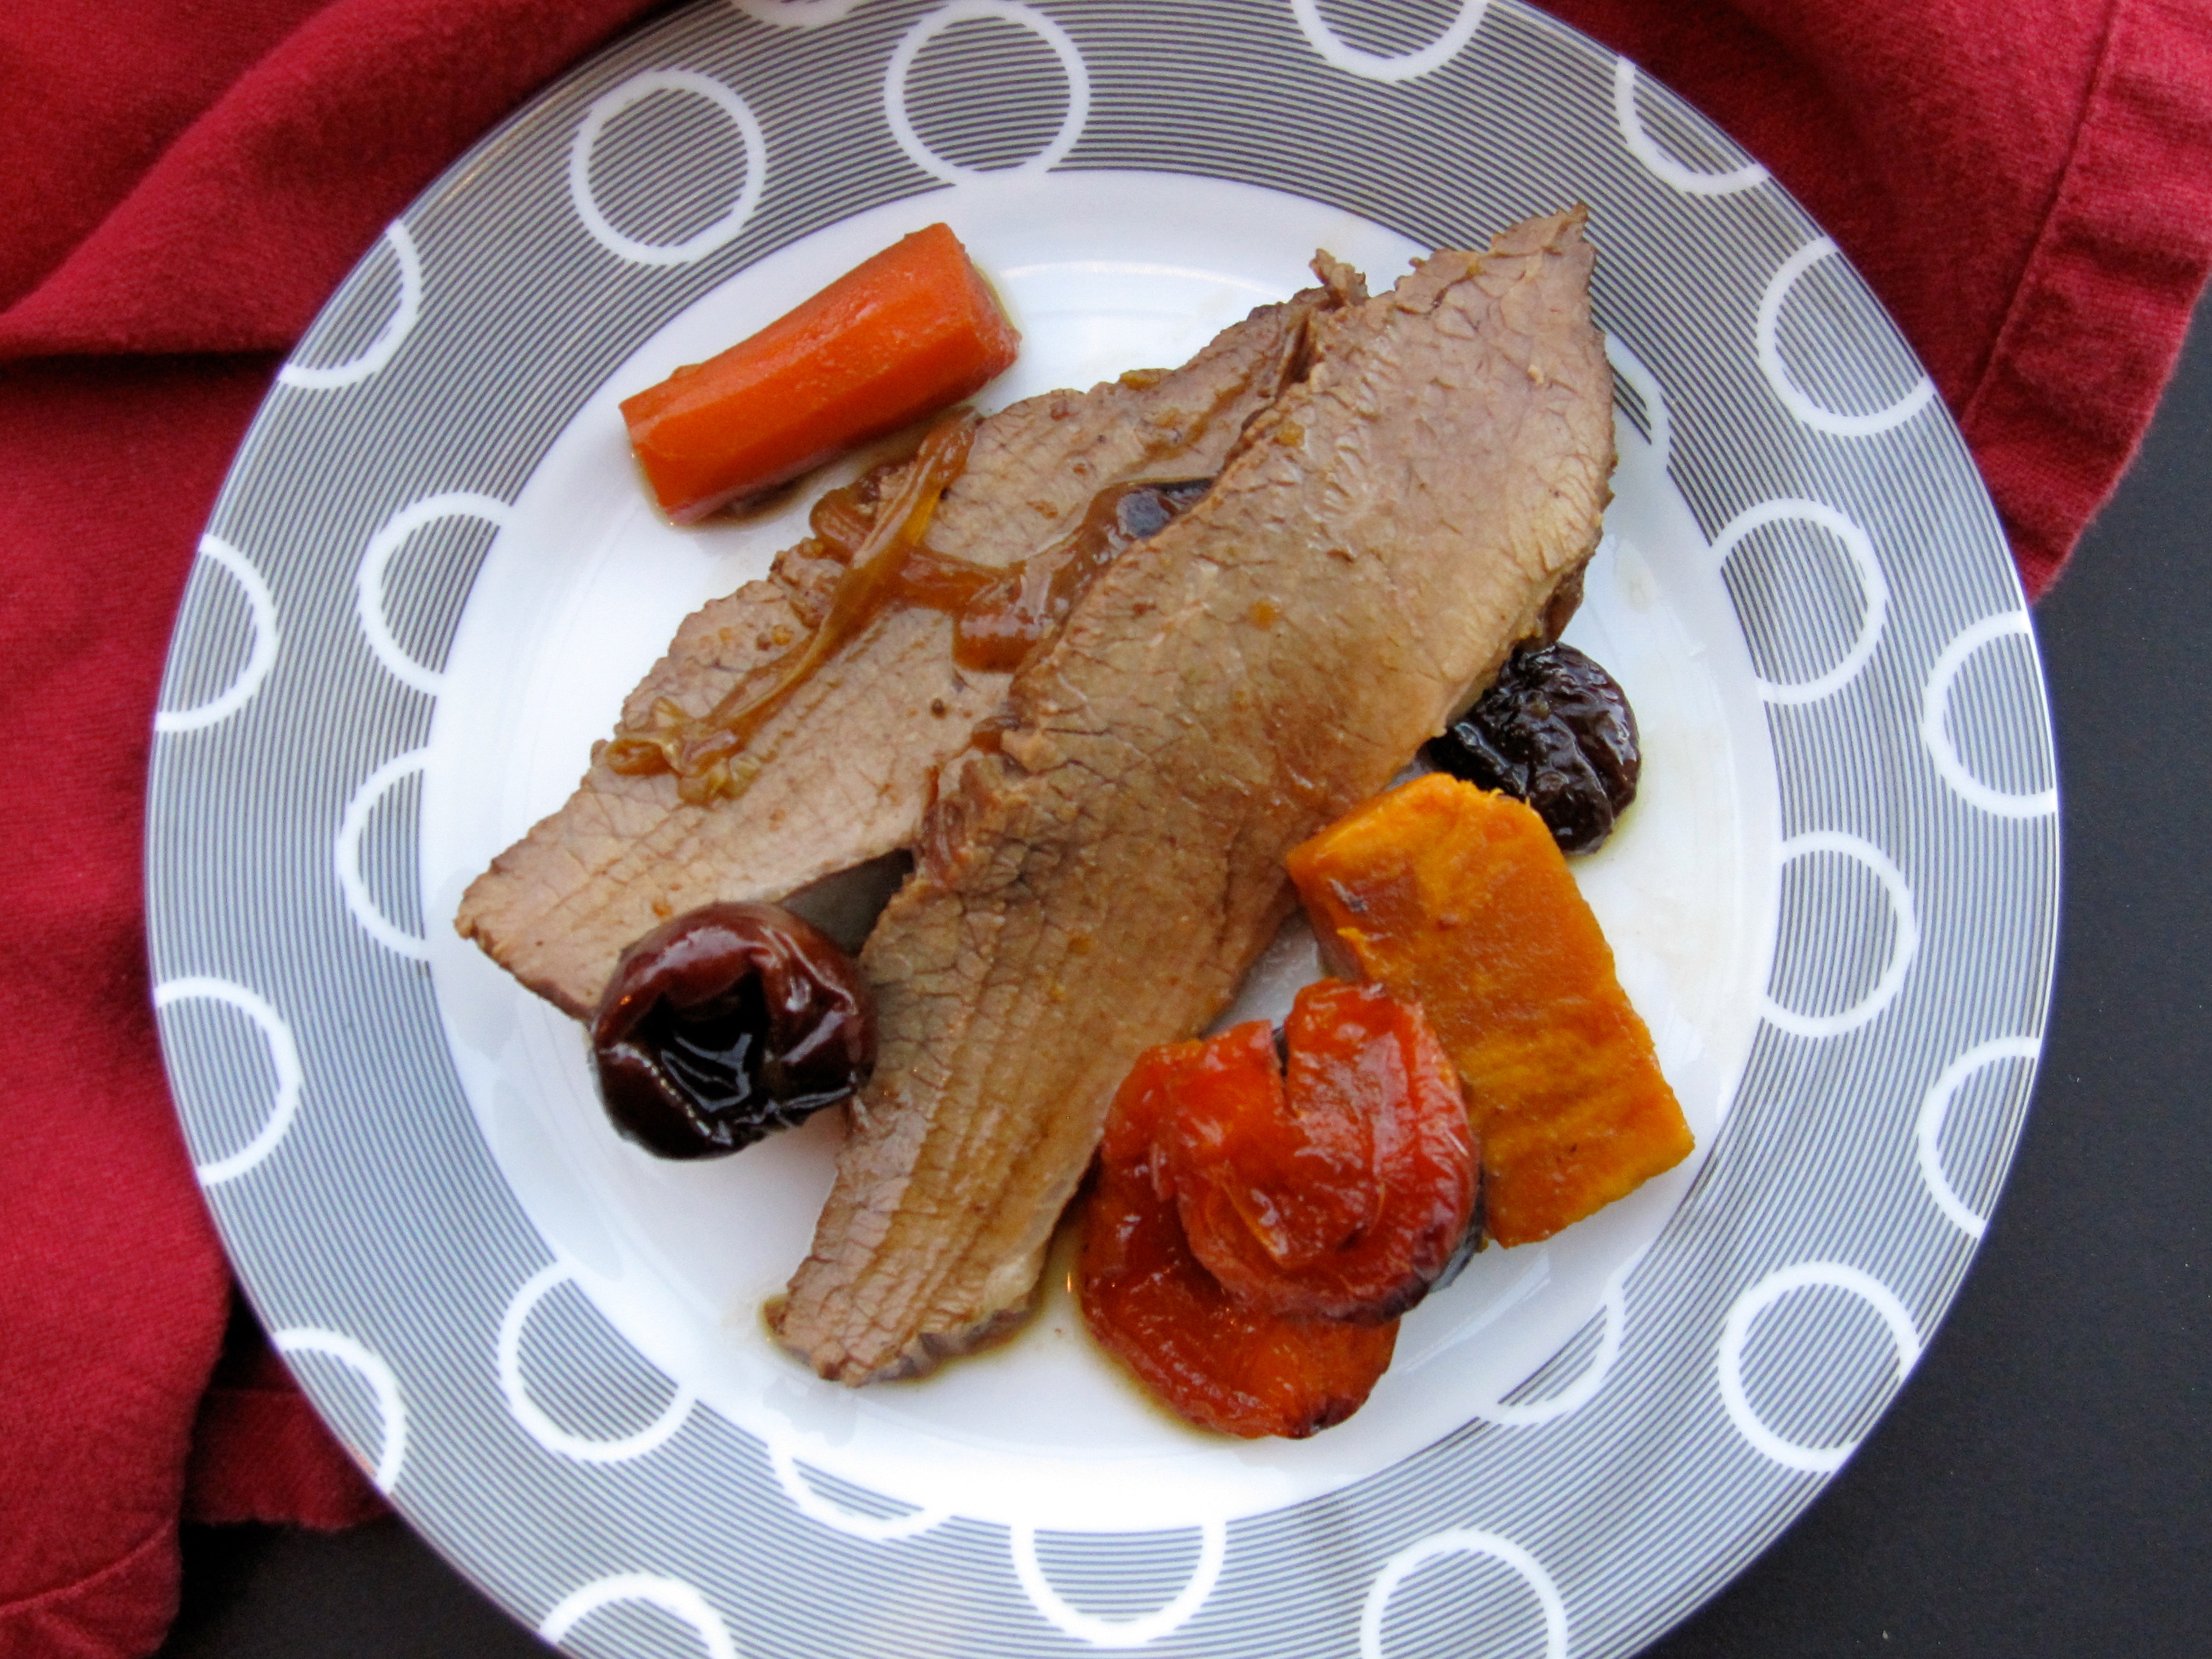 Grandma Ethel's Tzimmes style brisket on a white plate with grey circles on border.